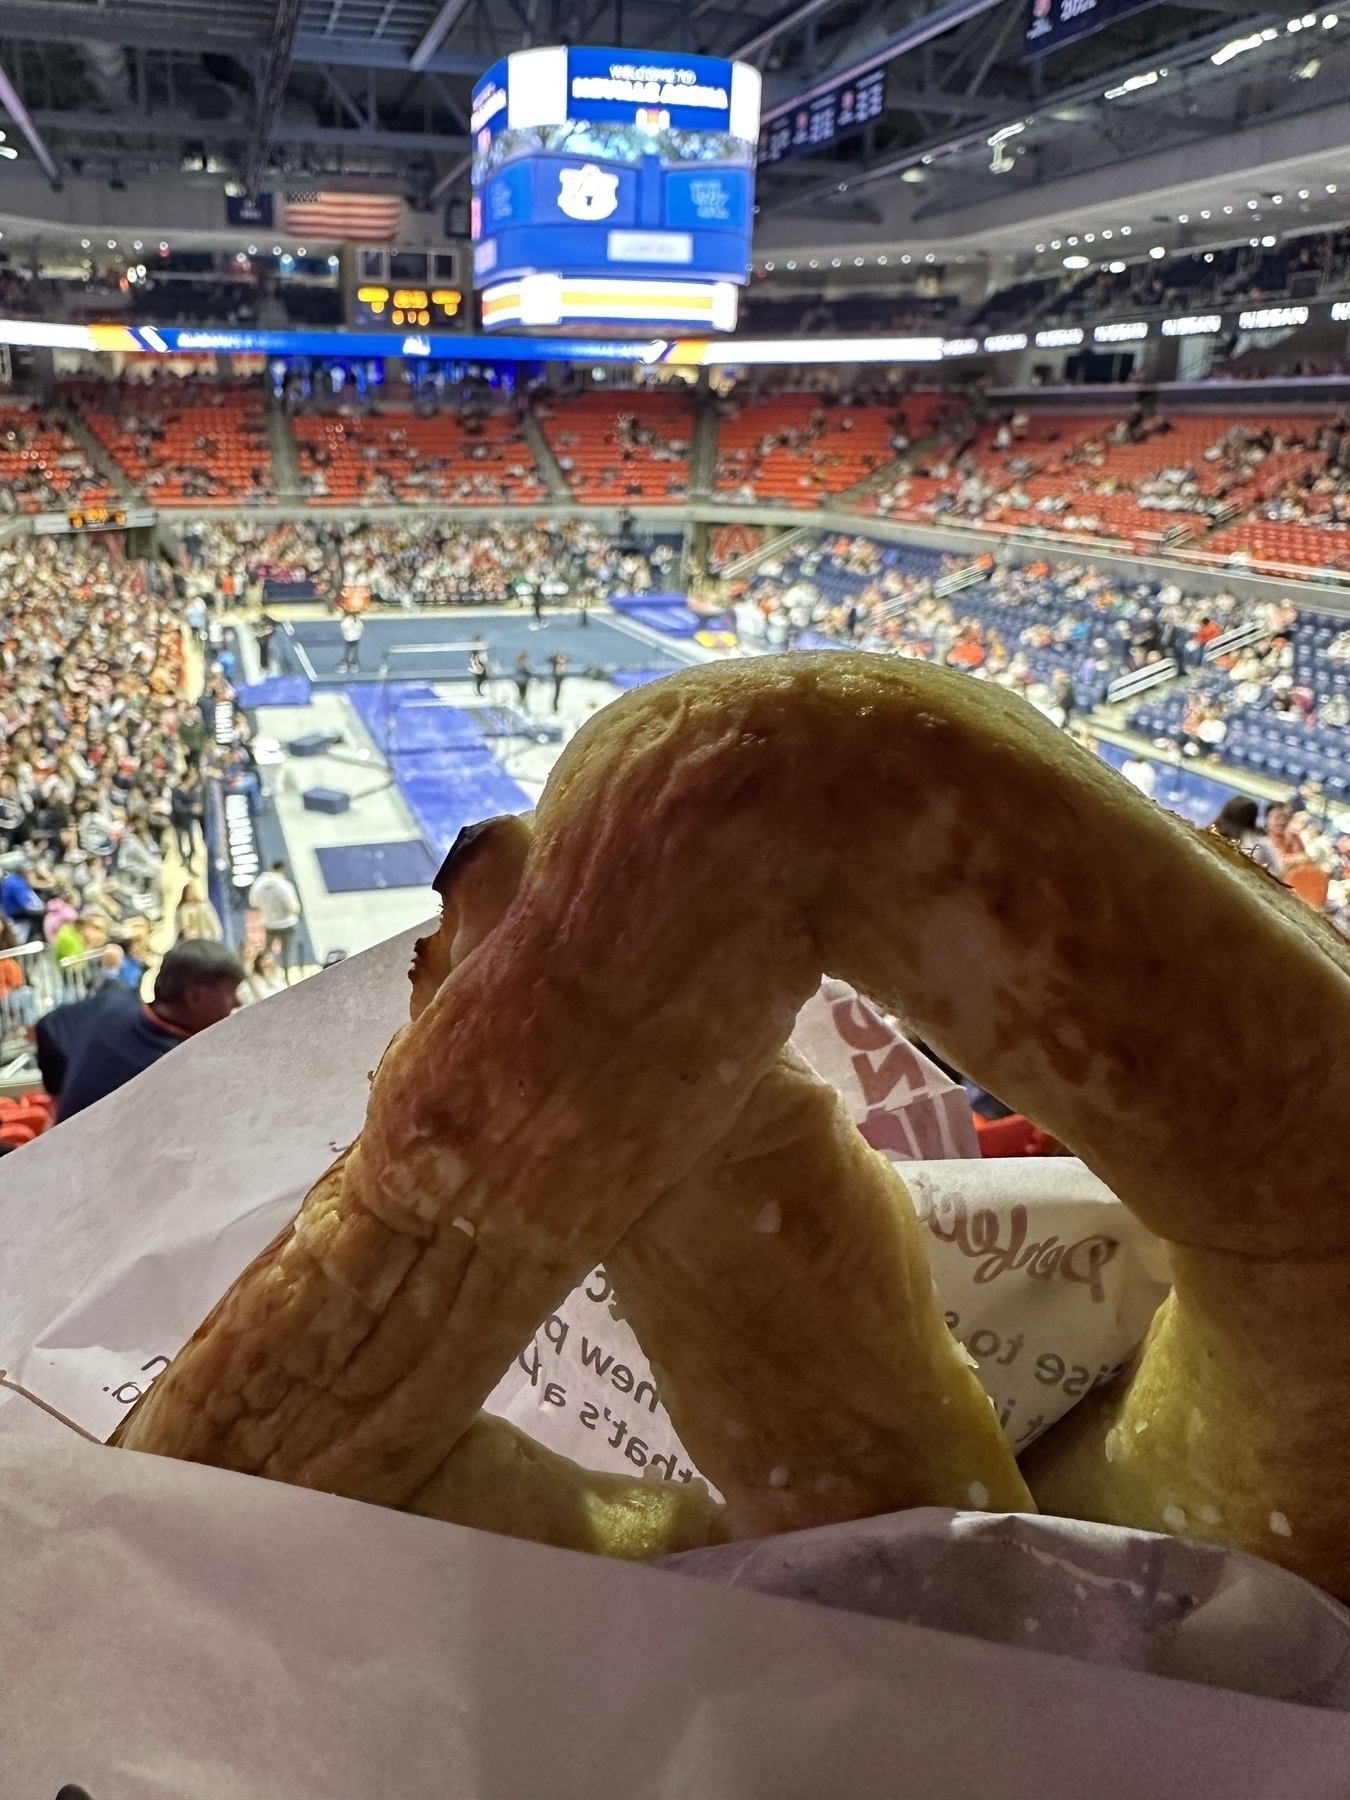 A soft pretzel with an arena in the background